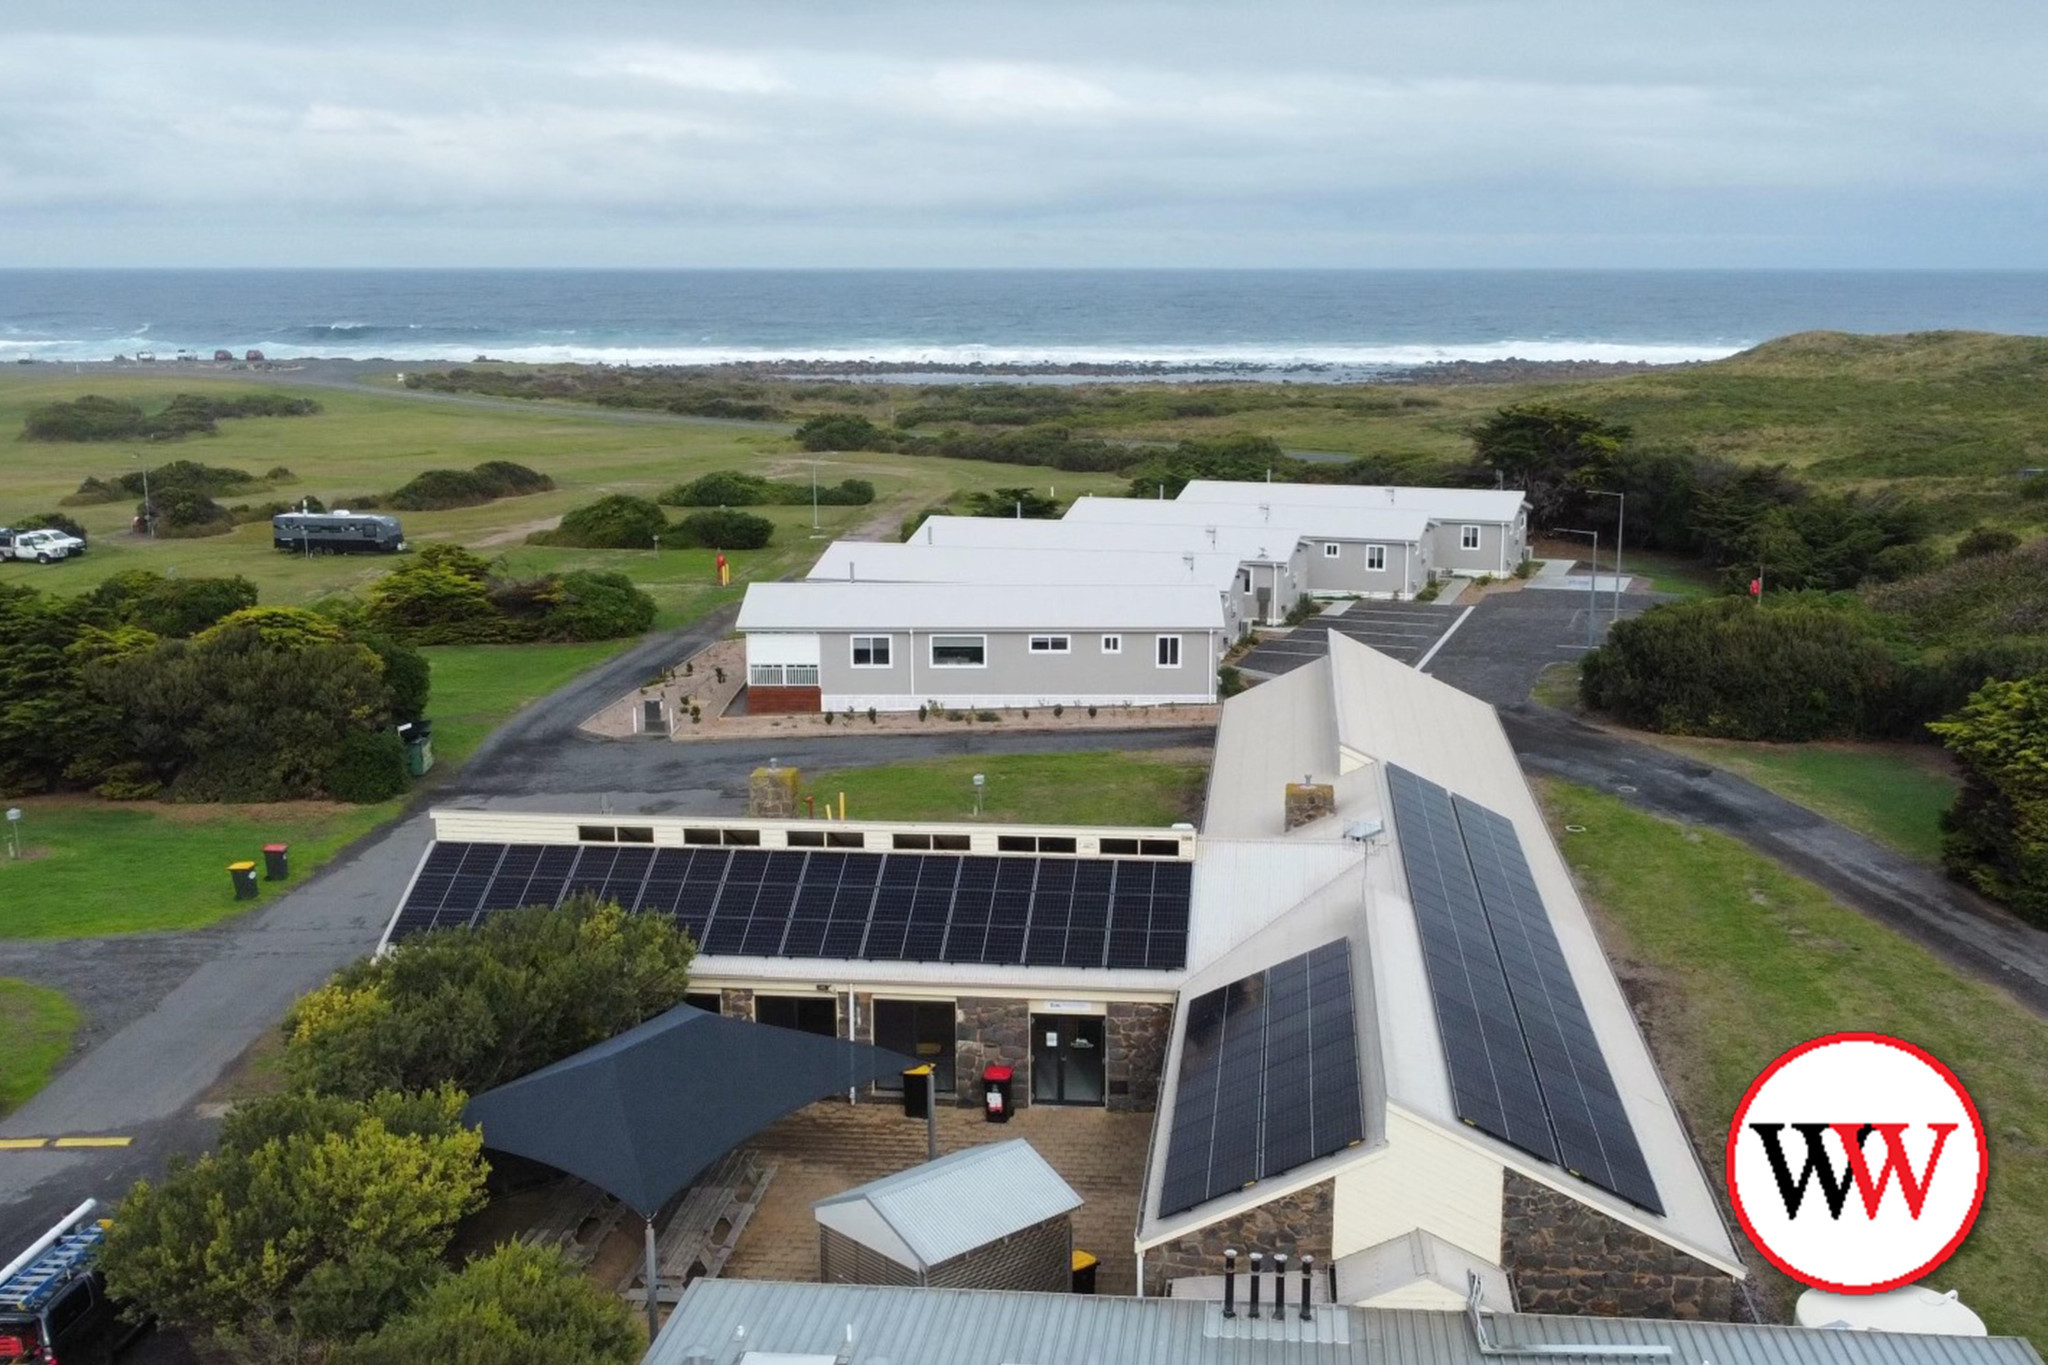 Solar panels have been installed at Southcombe Lodge, Port Fairy.